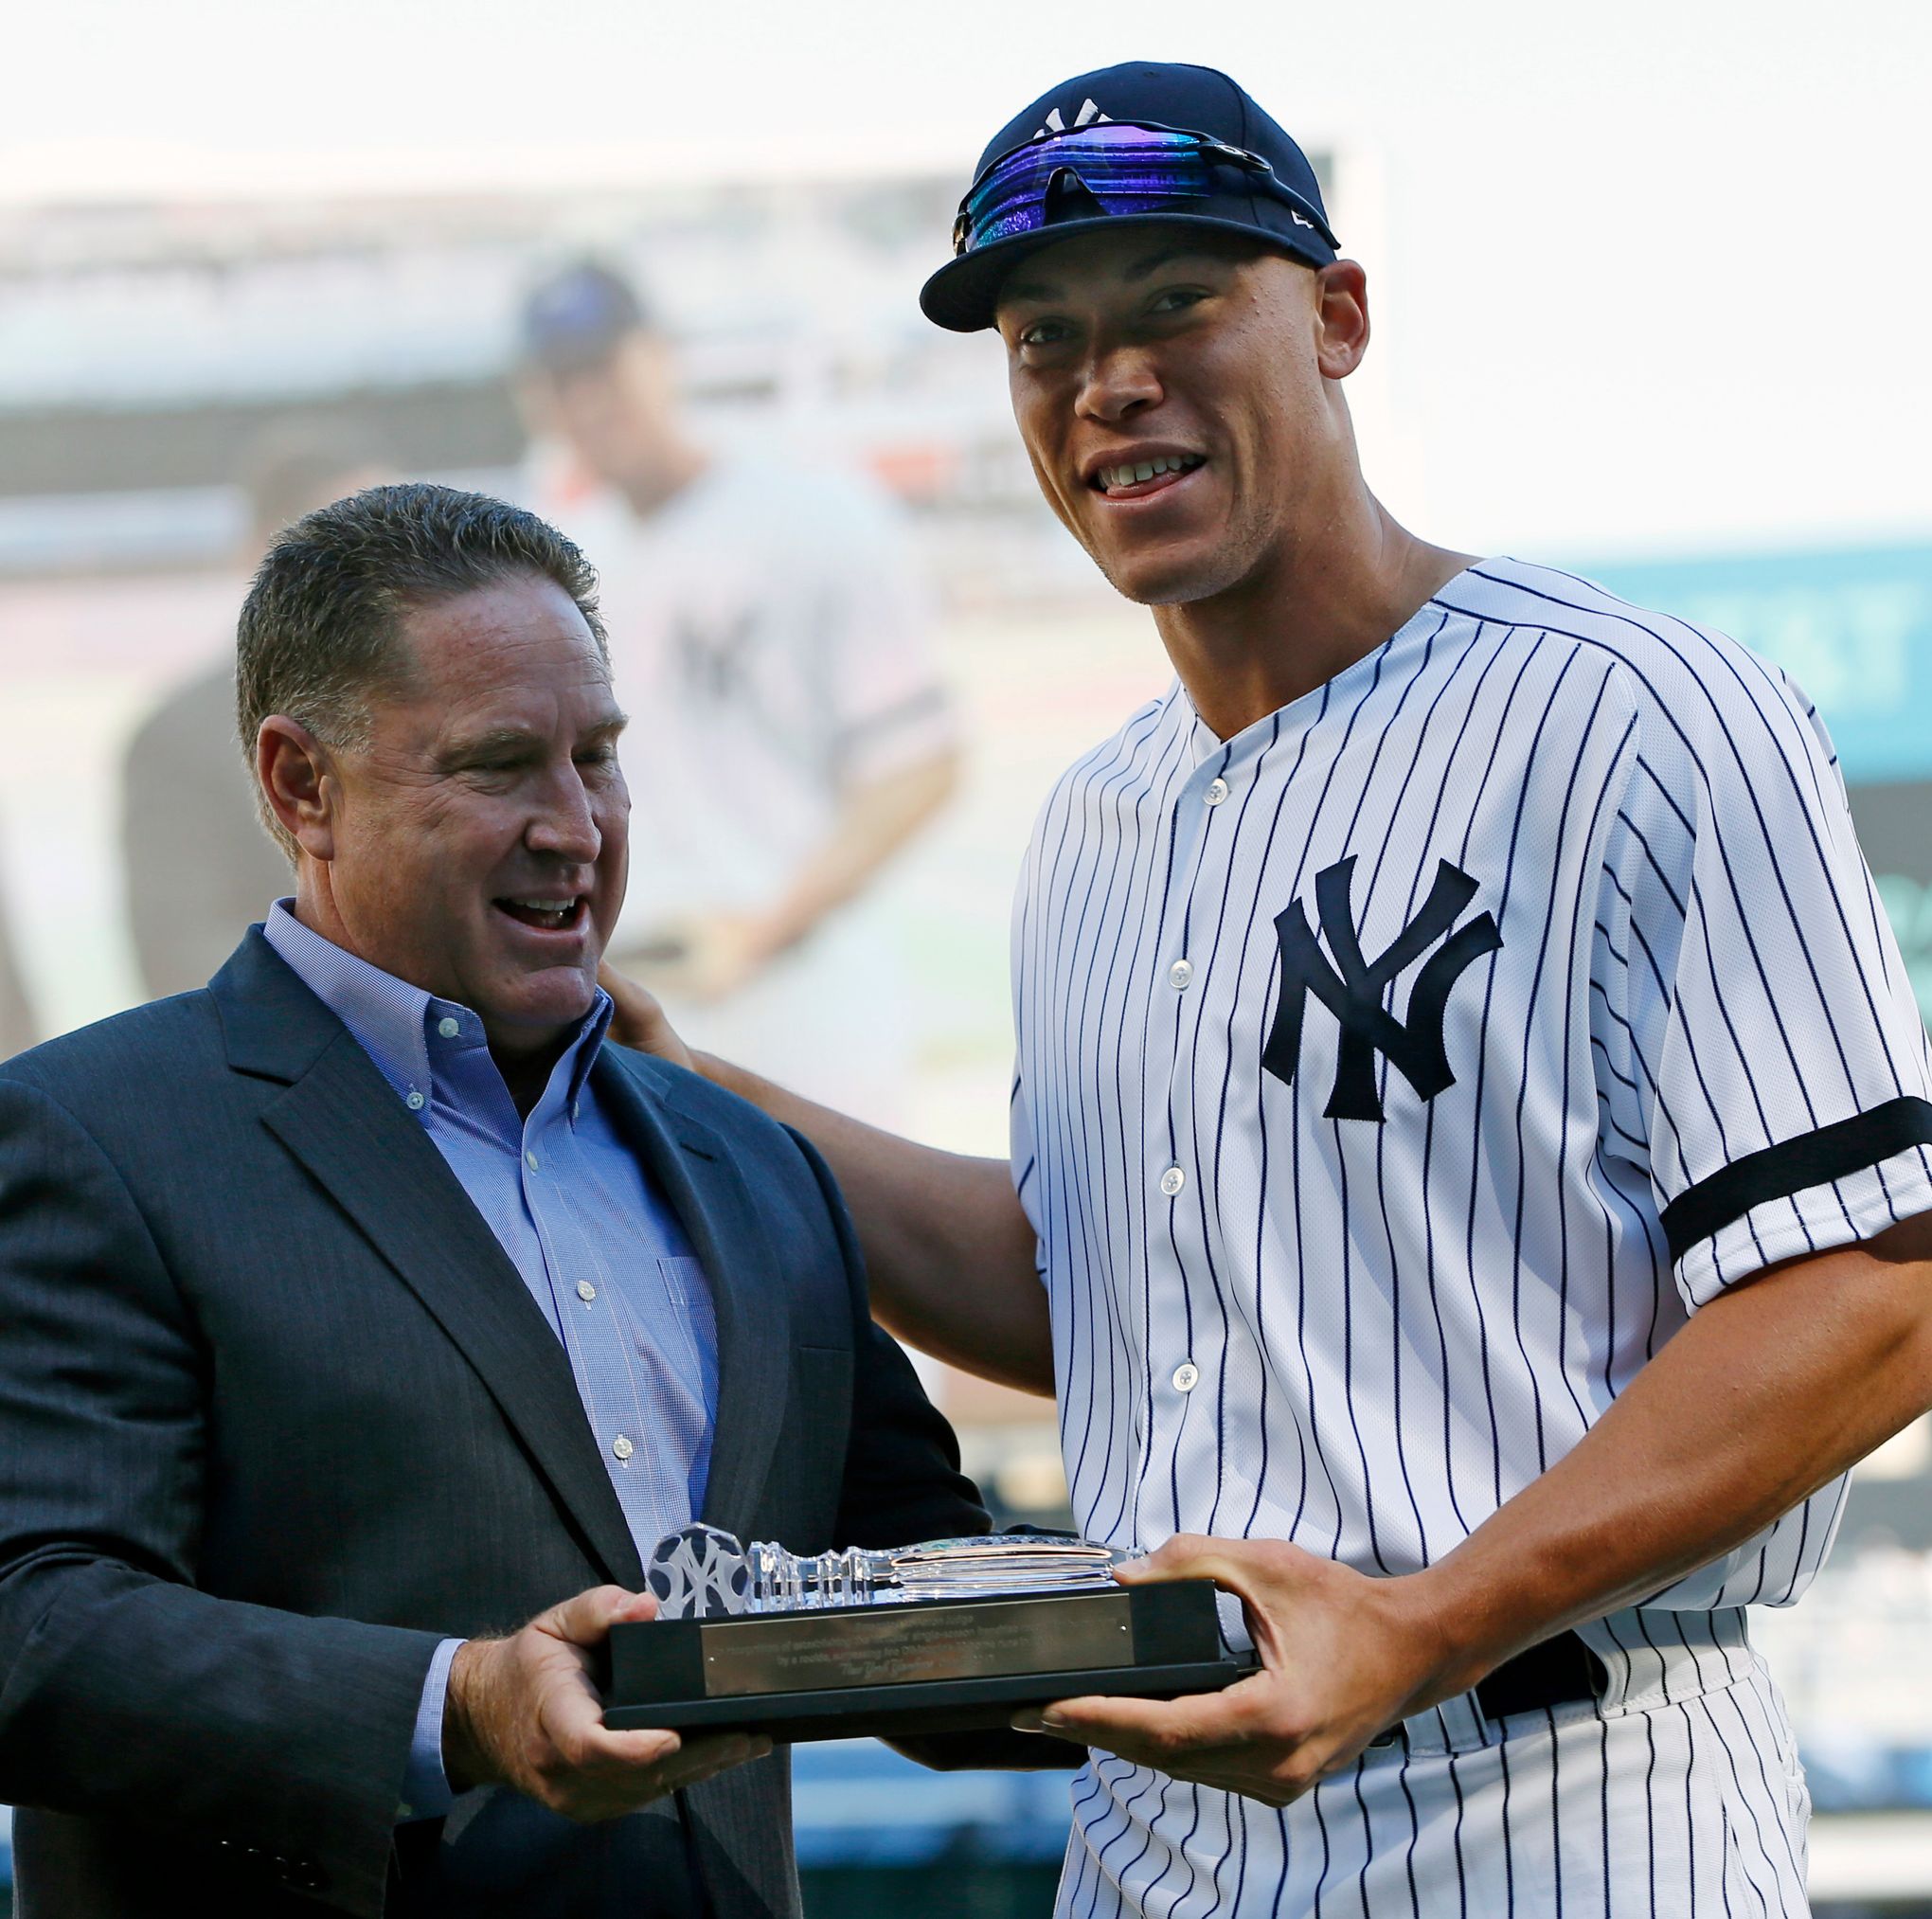 All rise for Aaron Judge, the big slugger and bigger man